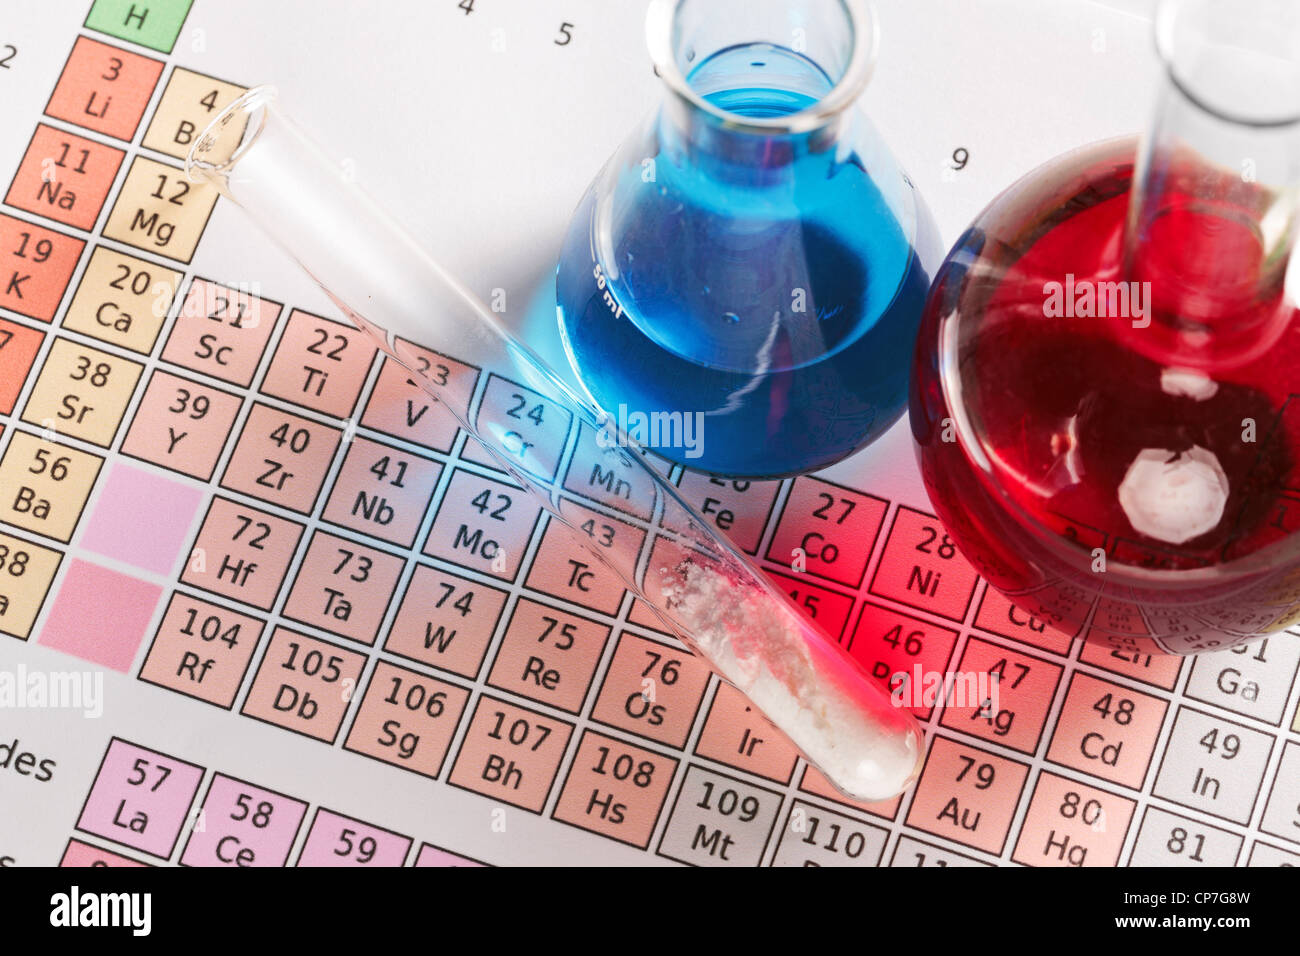 Photo of a periodic table of the elements with flasks and test tube containing chemicals both liquid and powder. Stock Photo